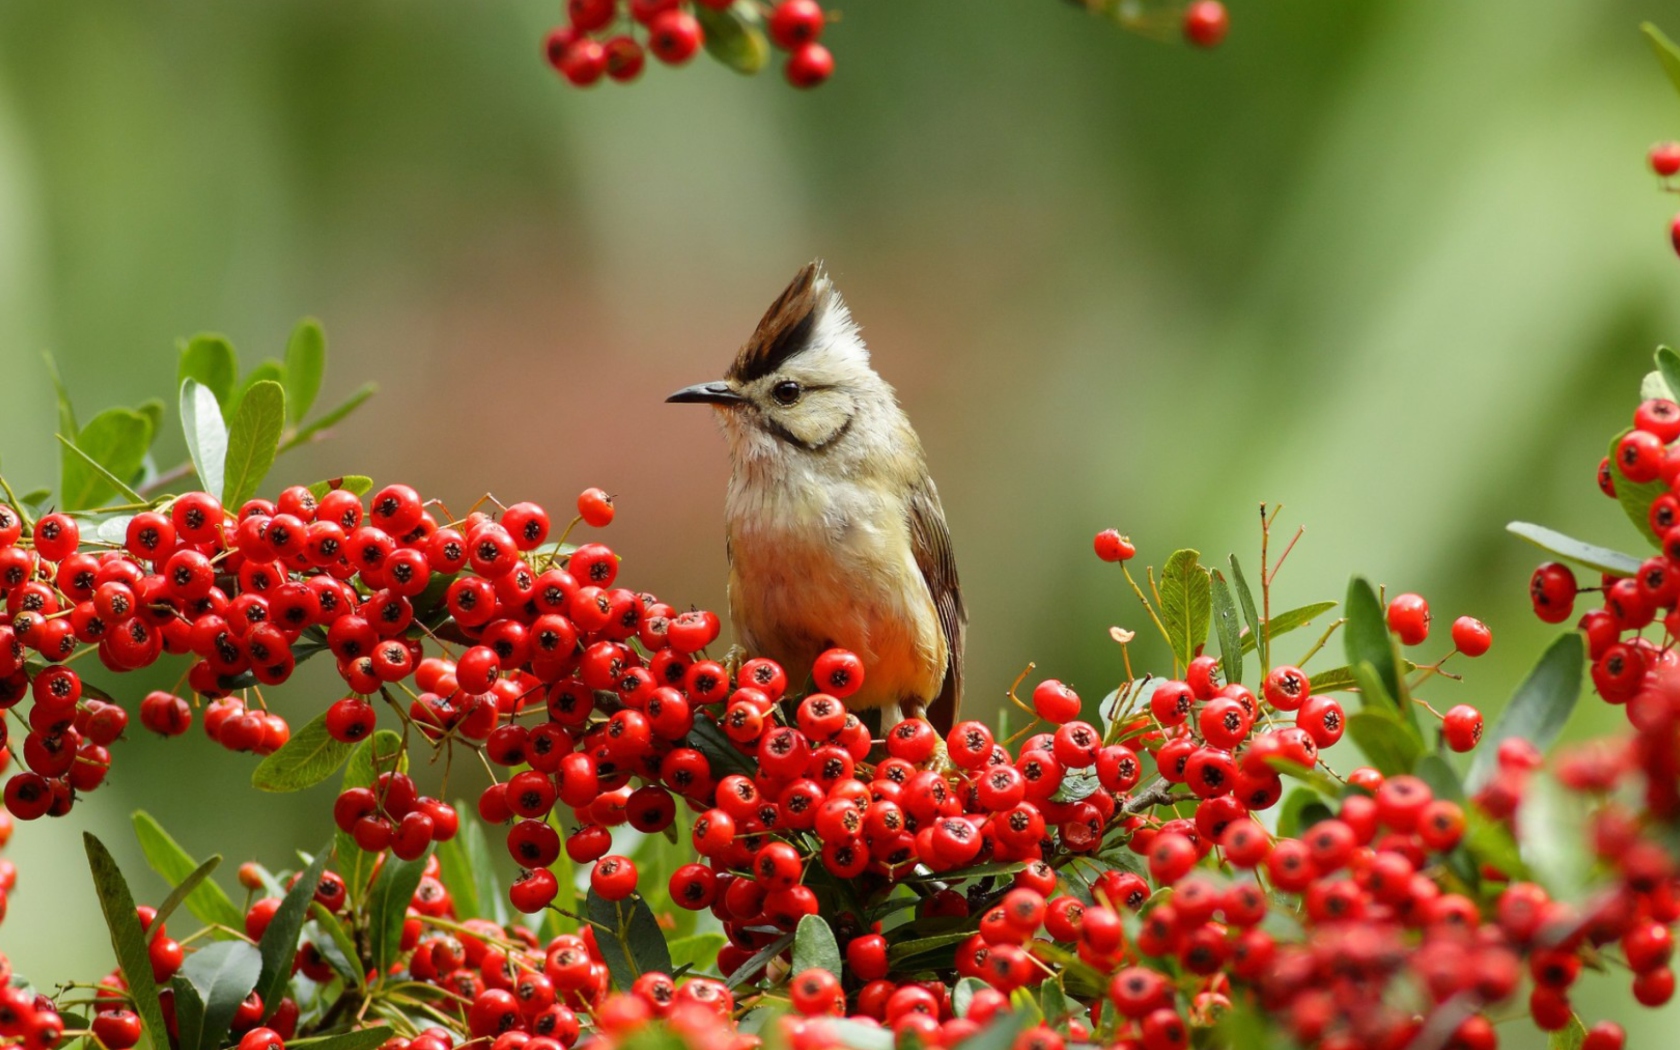 Bird On Branch With Red Berries wallpaper 1680x1050